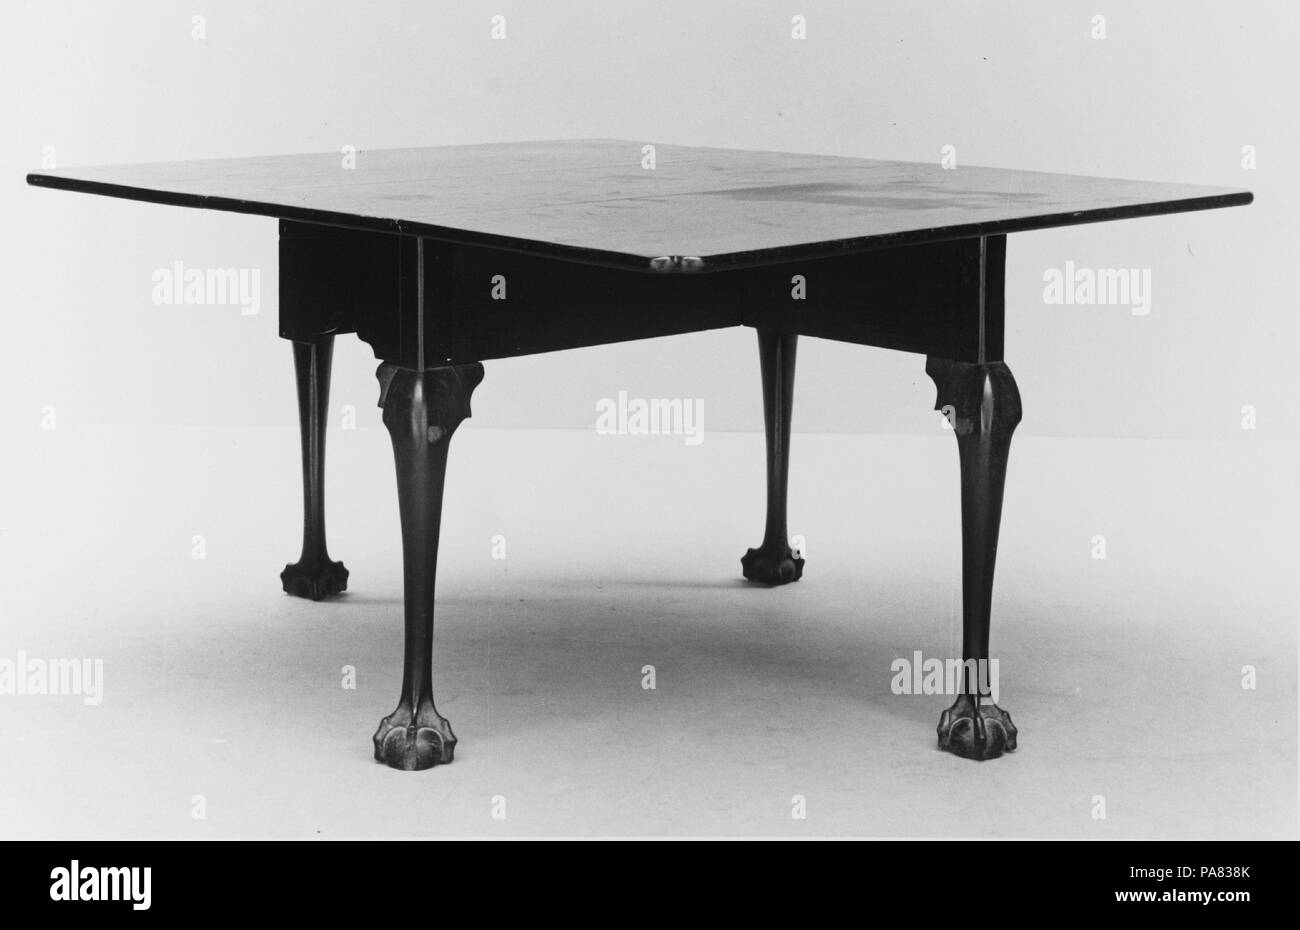 Drop Leaf Dining Table Culture American Dimensions 28 X 53 1 4